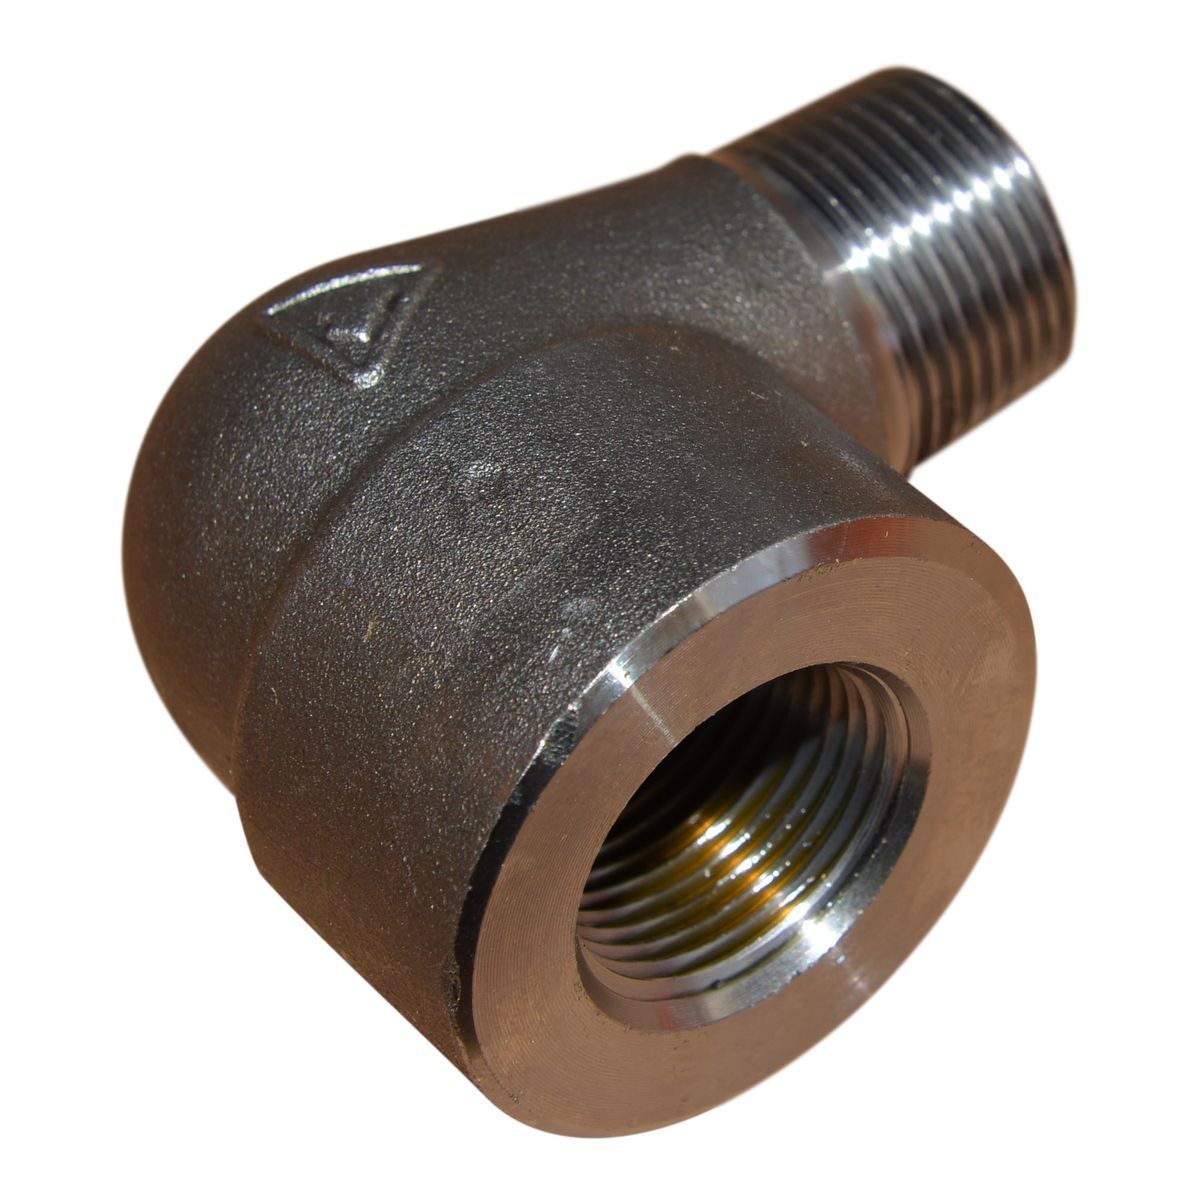 Compression Brass Fittings-Forged Reducing Elbow - Topa